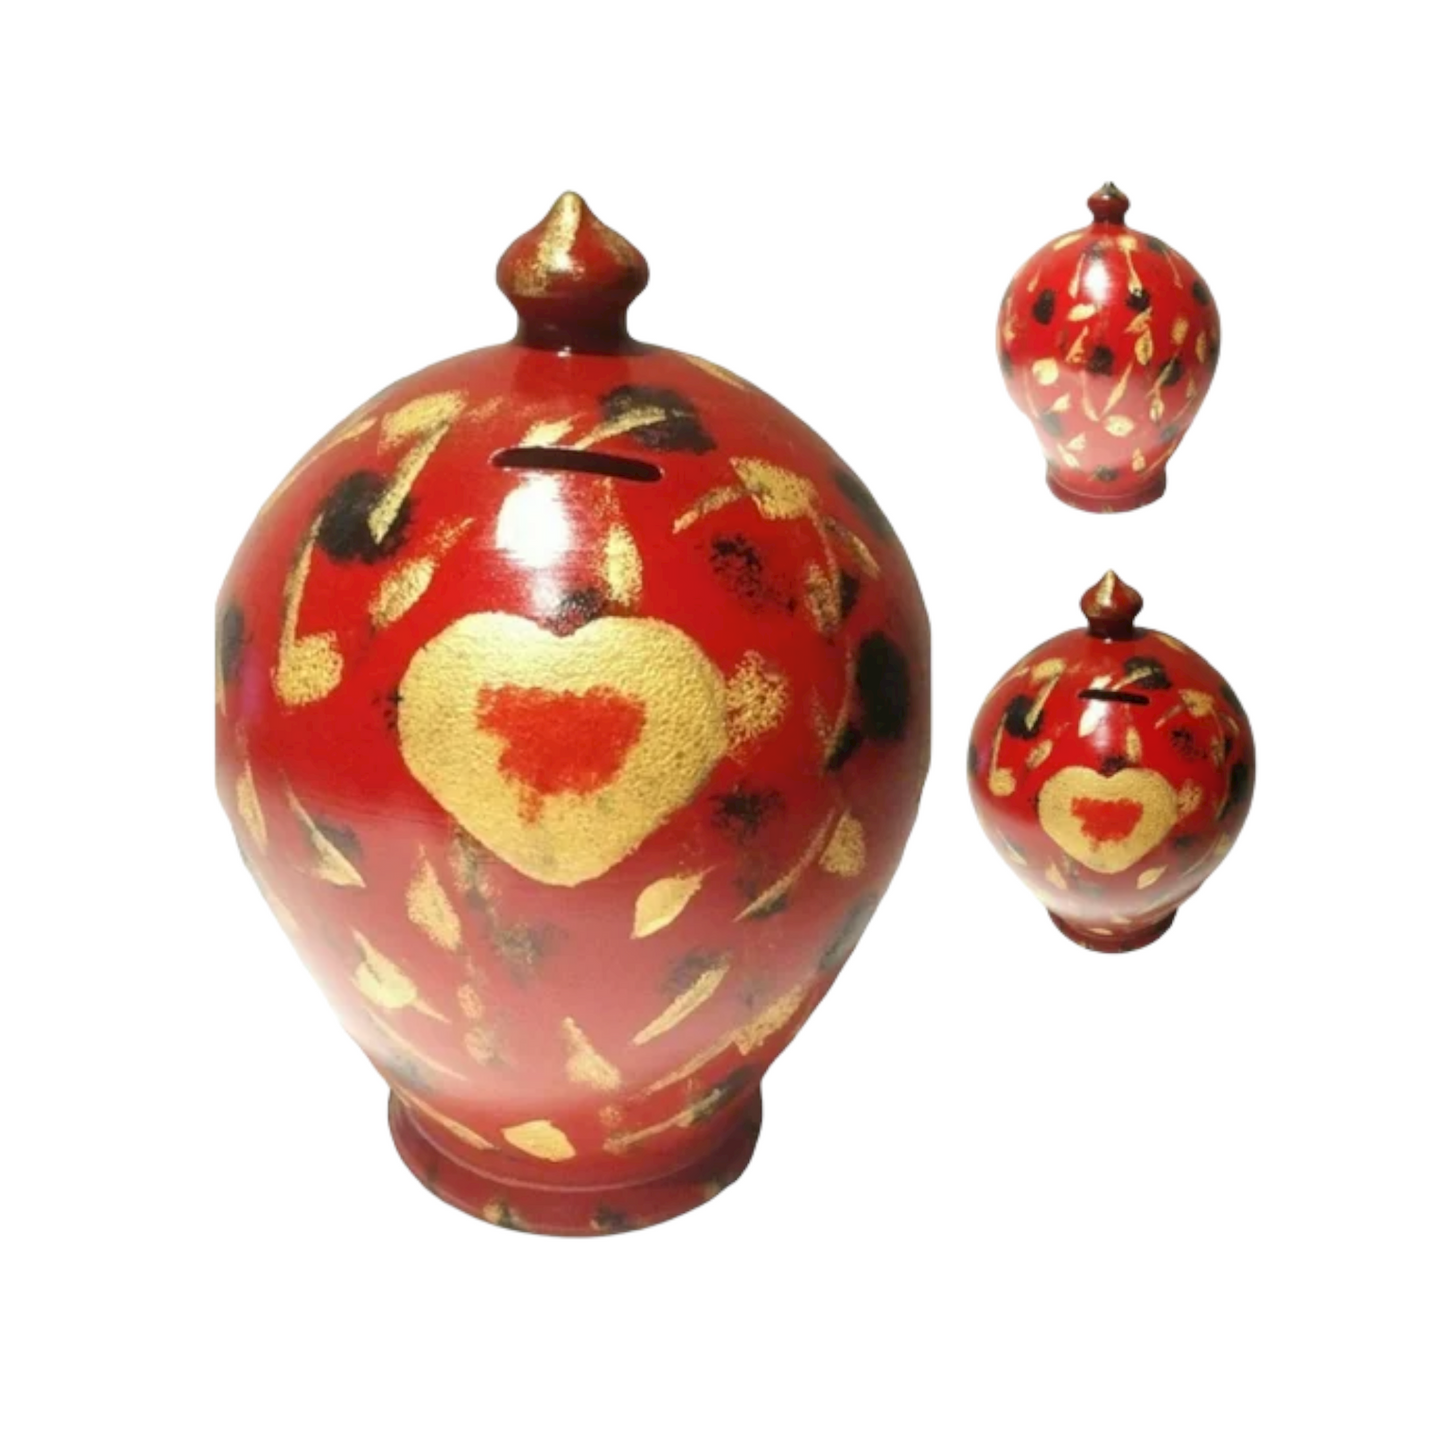 Colors: Red, gold, black. Heart: Gold and red. 💰Size: 15 cm = 5.90 inches in height. Circumference: 40 cm = 15.74 inches. With hole and stopper plug, or without hole.